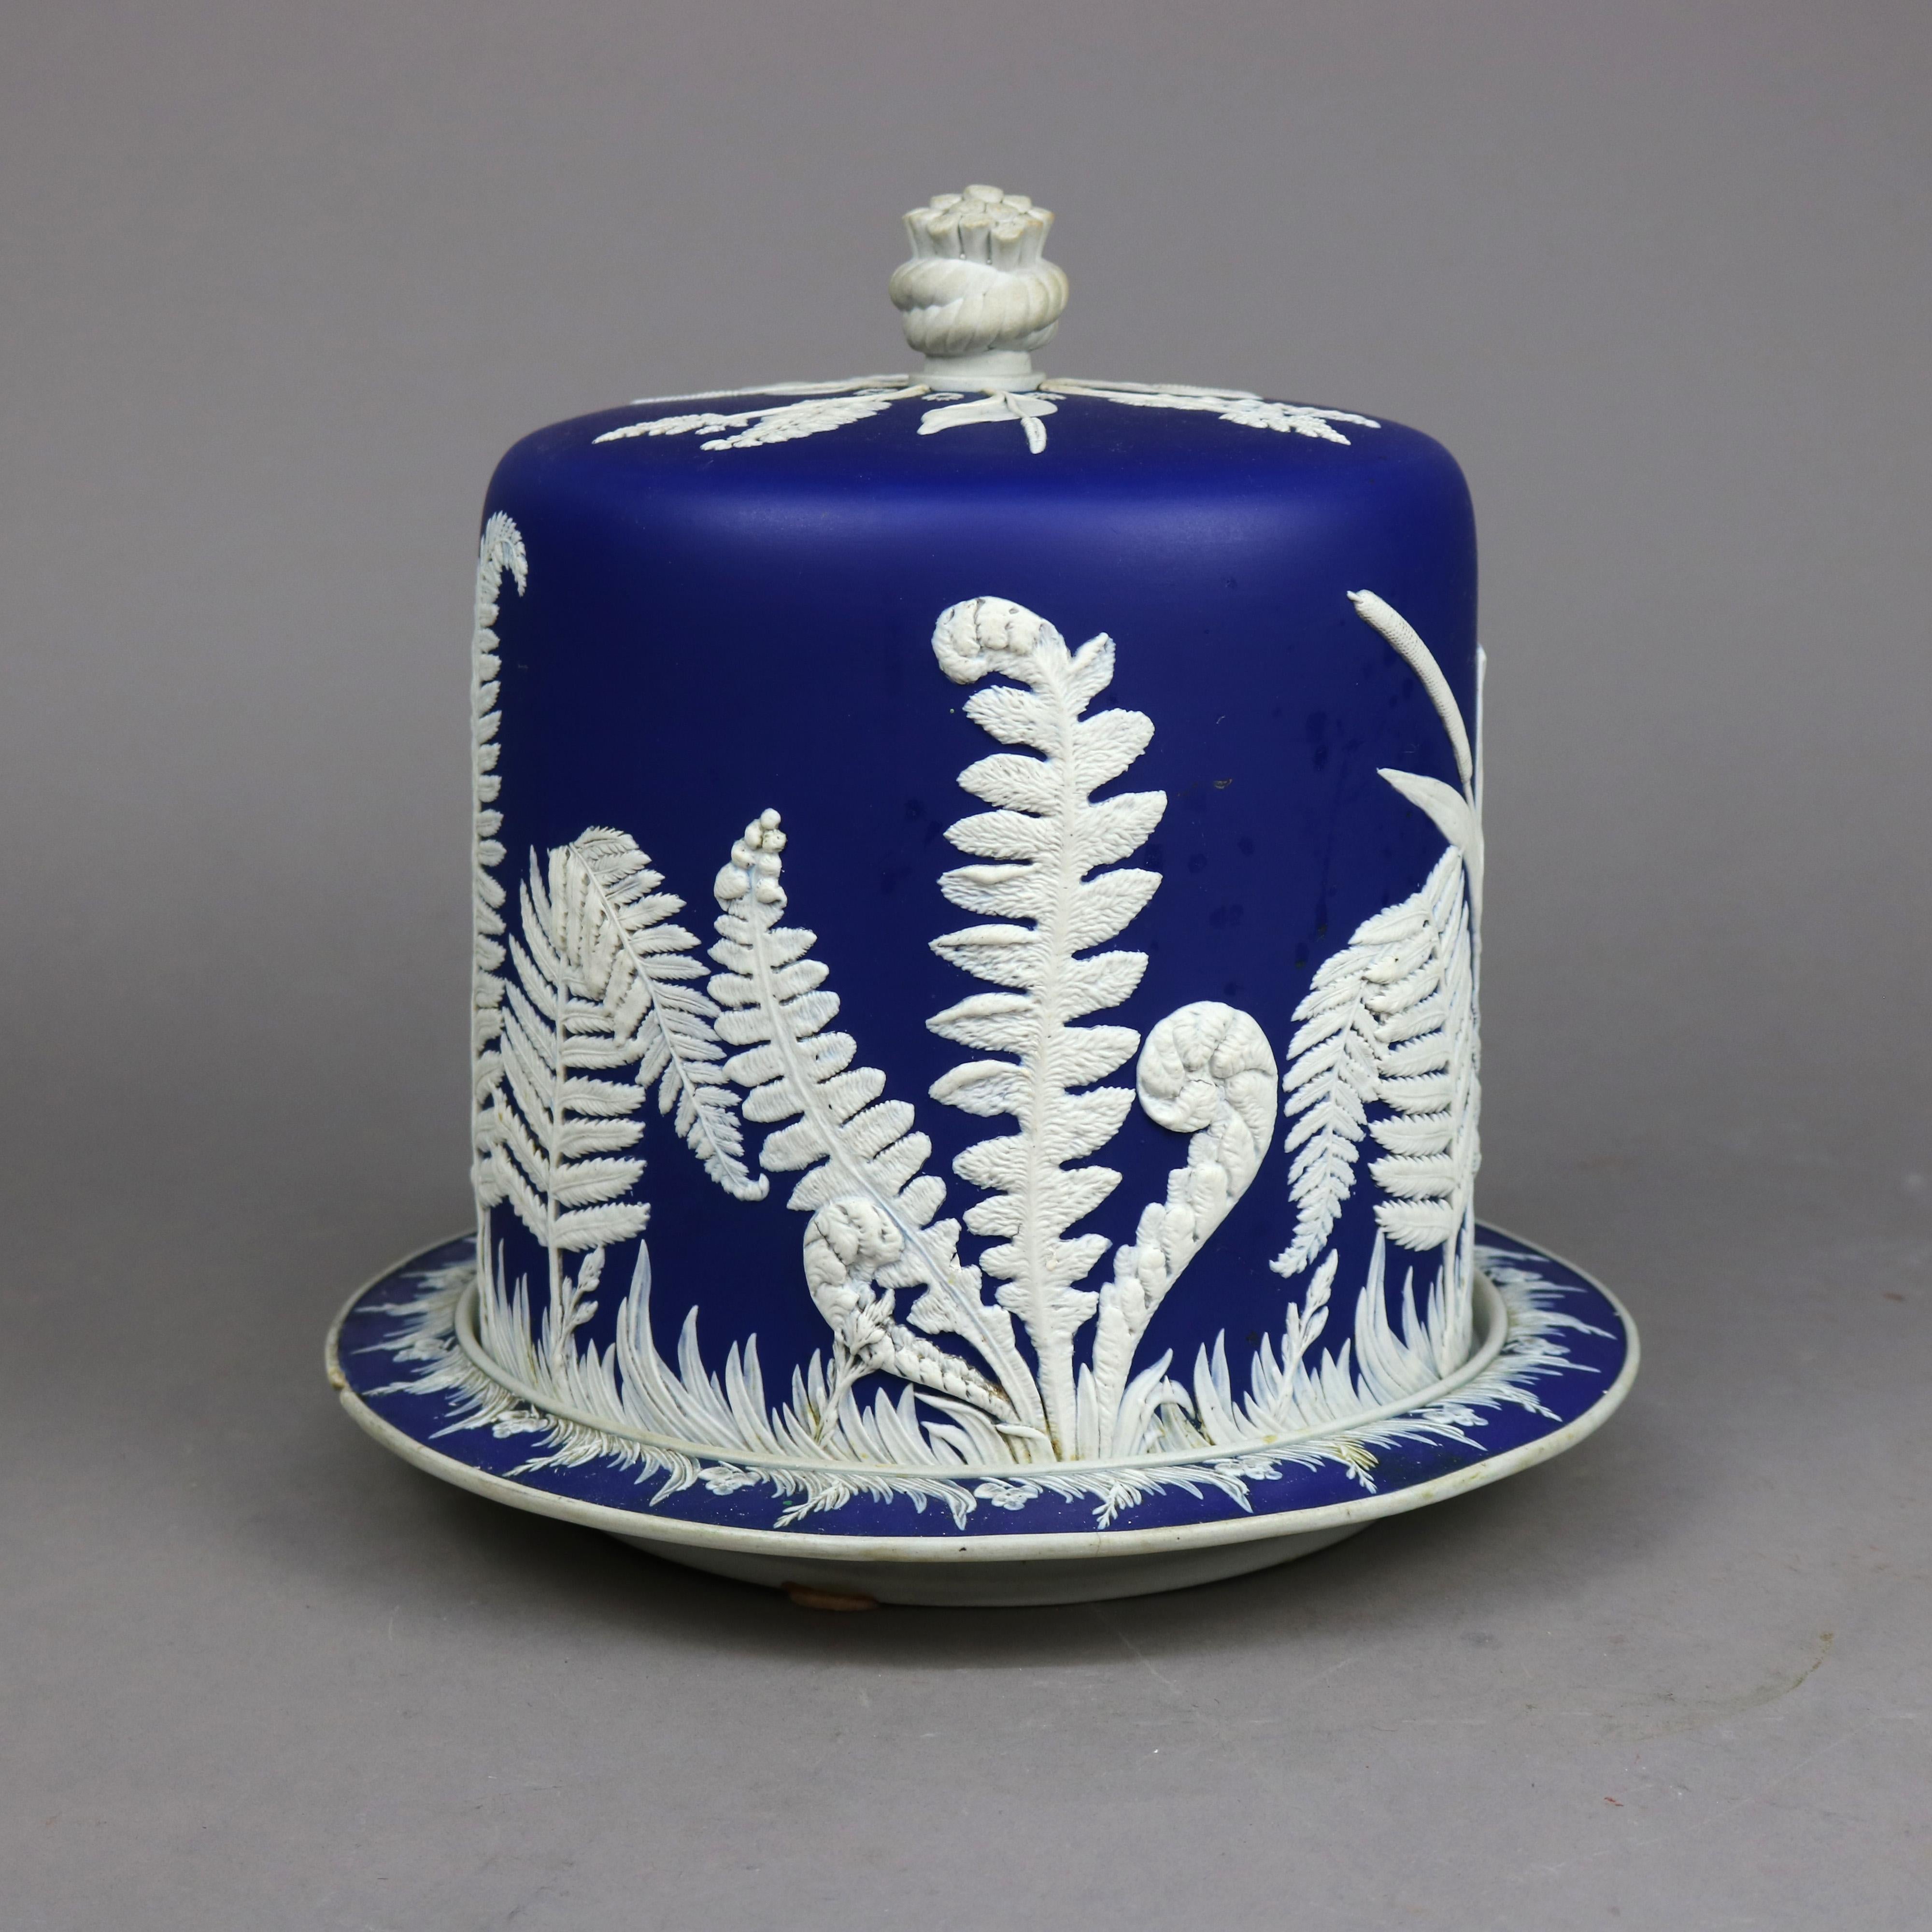 An antique and large English jasperware cheese keeper in the attributed to Wedgwood offers bisque porcelain construction with white fern cameo in relief on a cobalt blue ground, 19th century

Measures - 11.75''H x 11.5''W x 11.5''D.